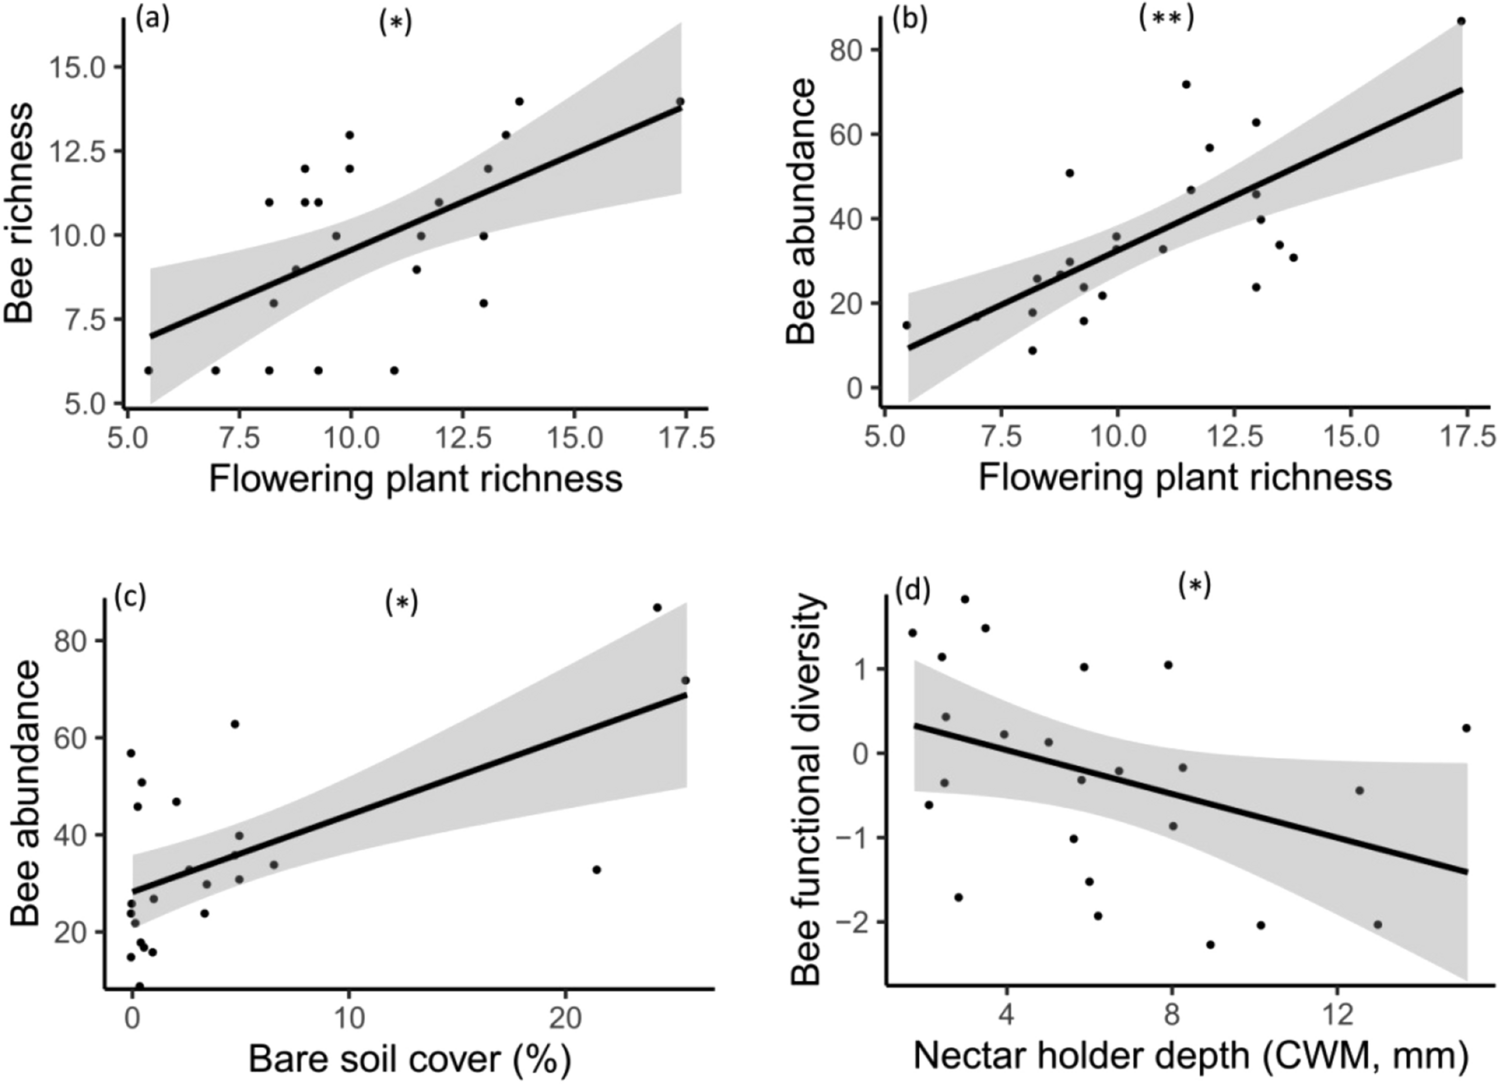 Urban fragmentation leads to lower floral diversity, with knock-on impacts  on bee biodiversity | Scientific Reports